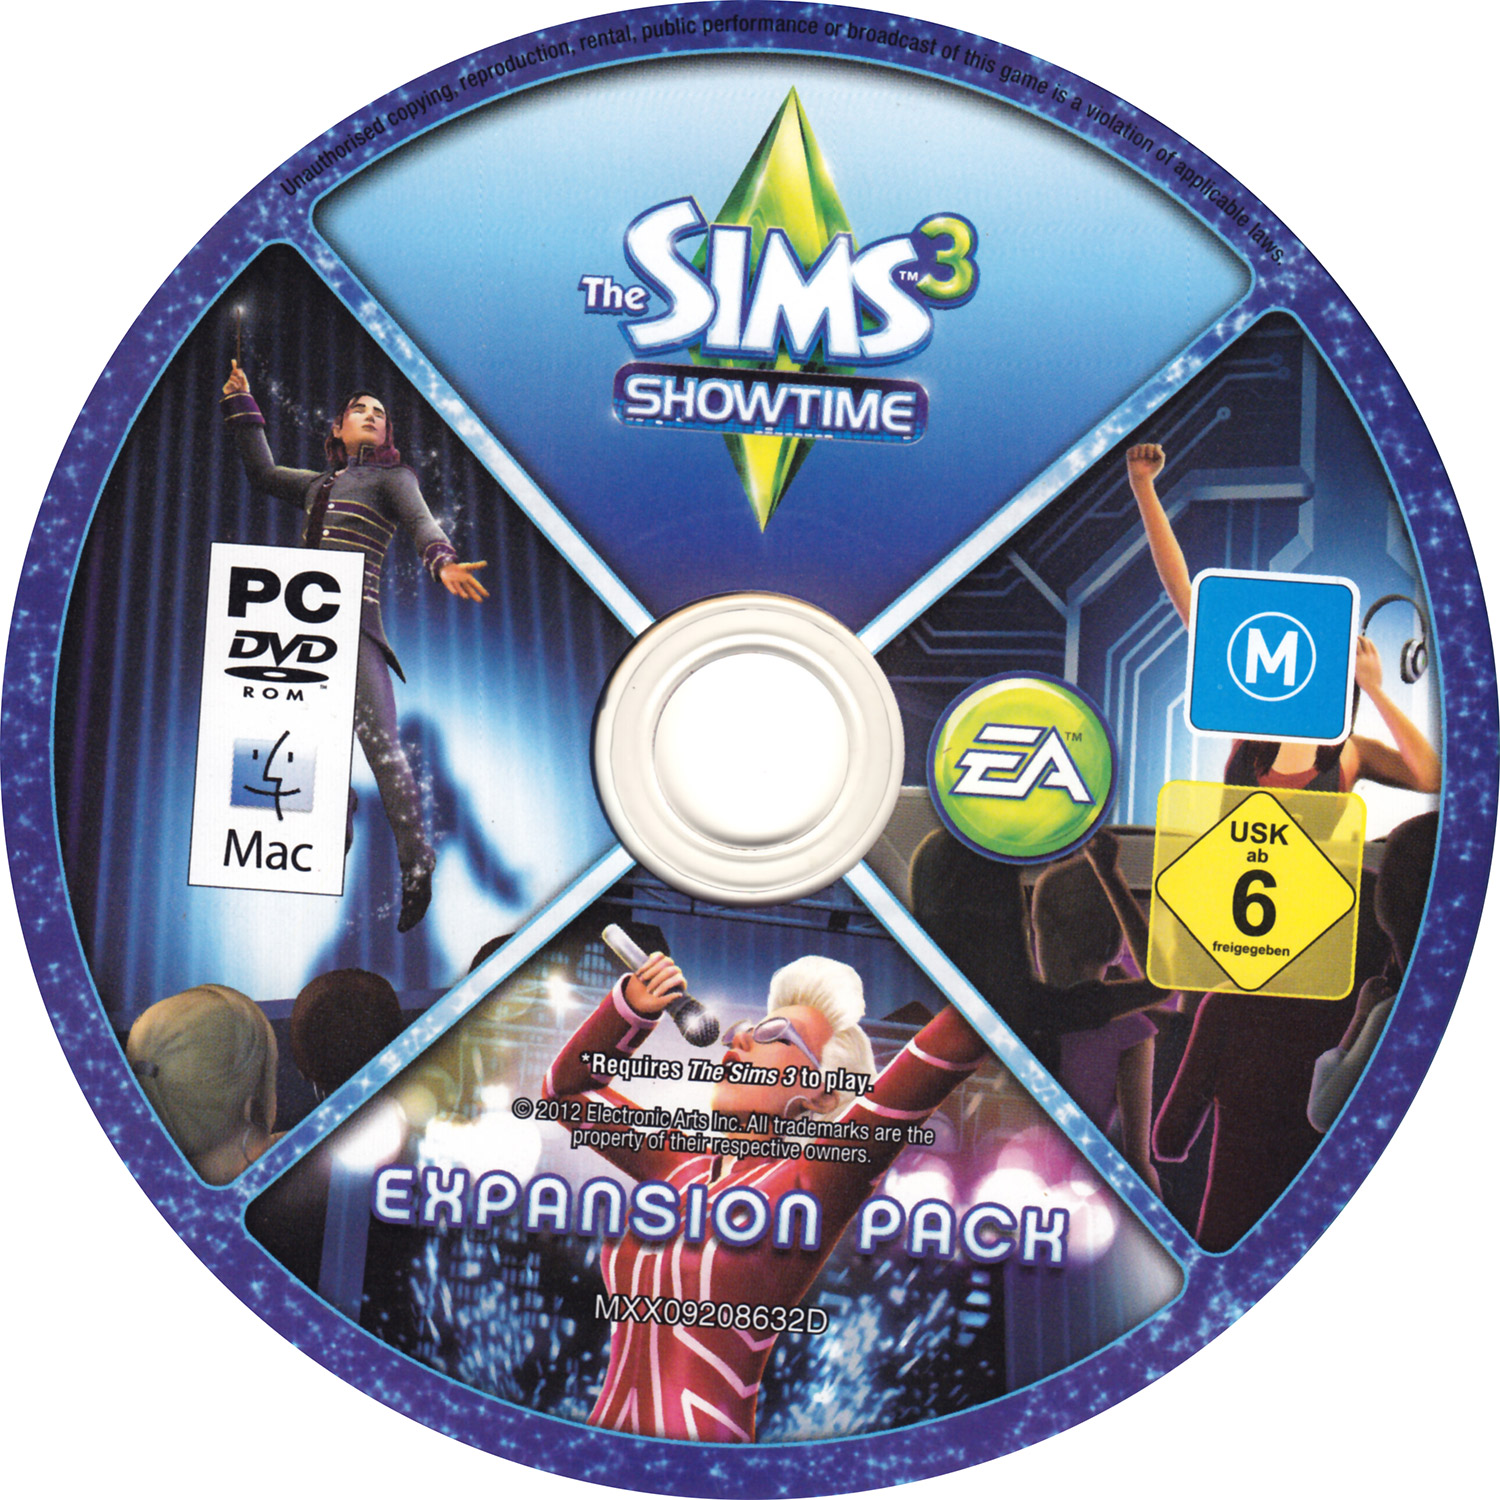 The Sims 3: Showtime - CD obal